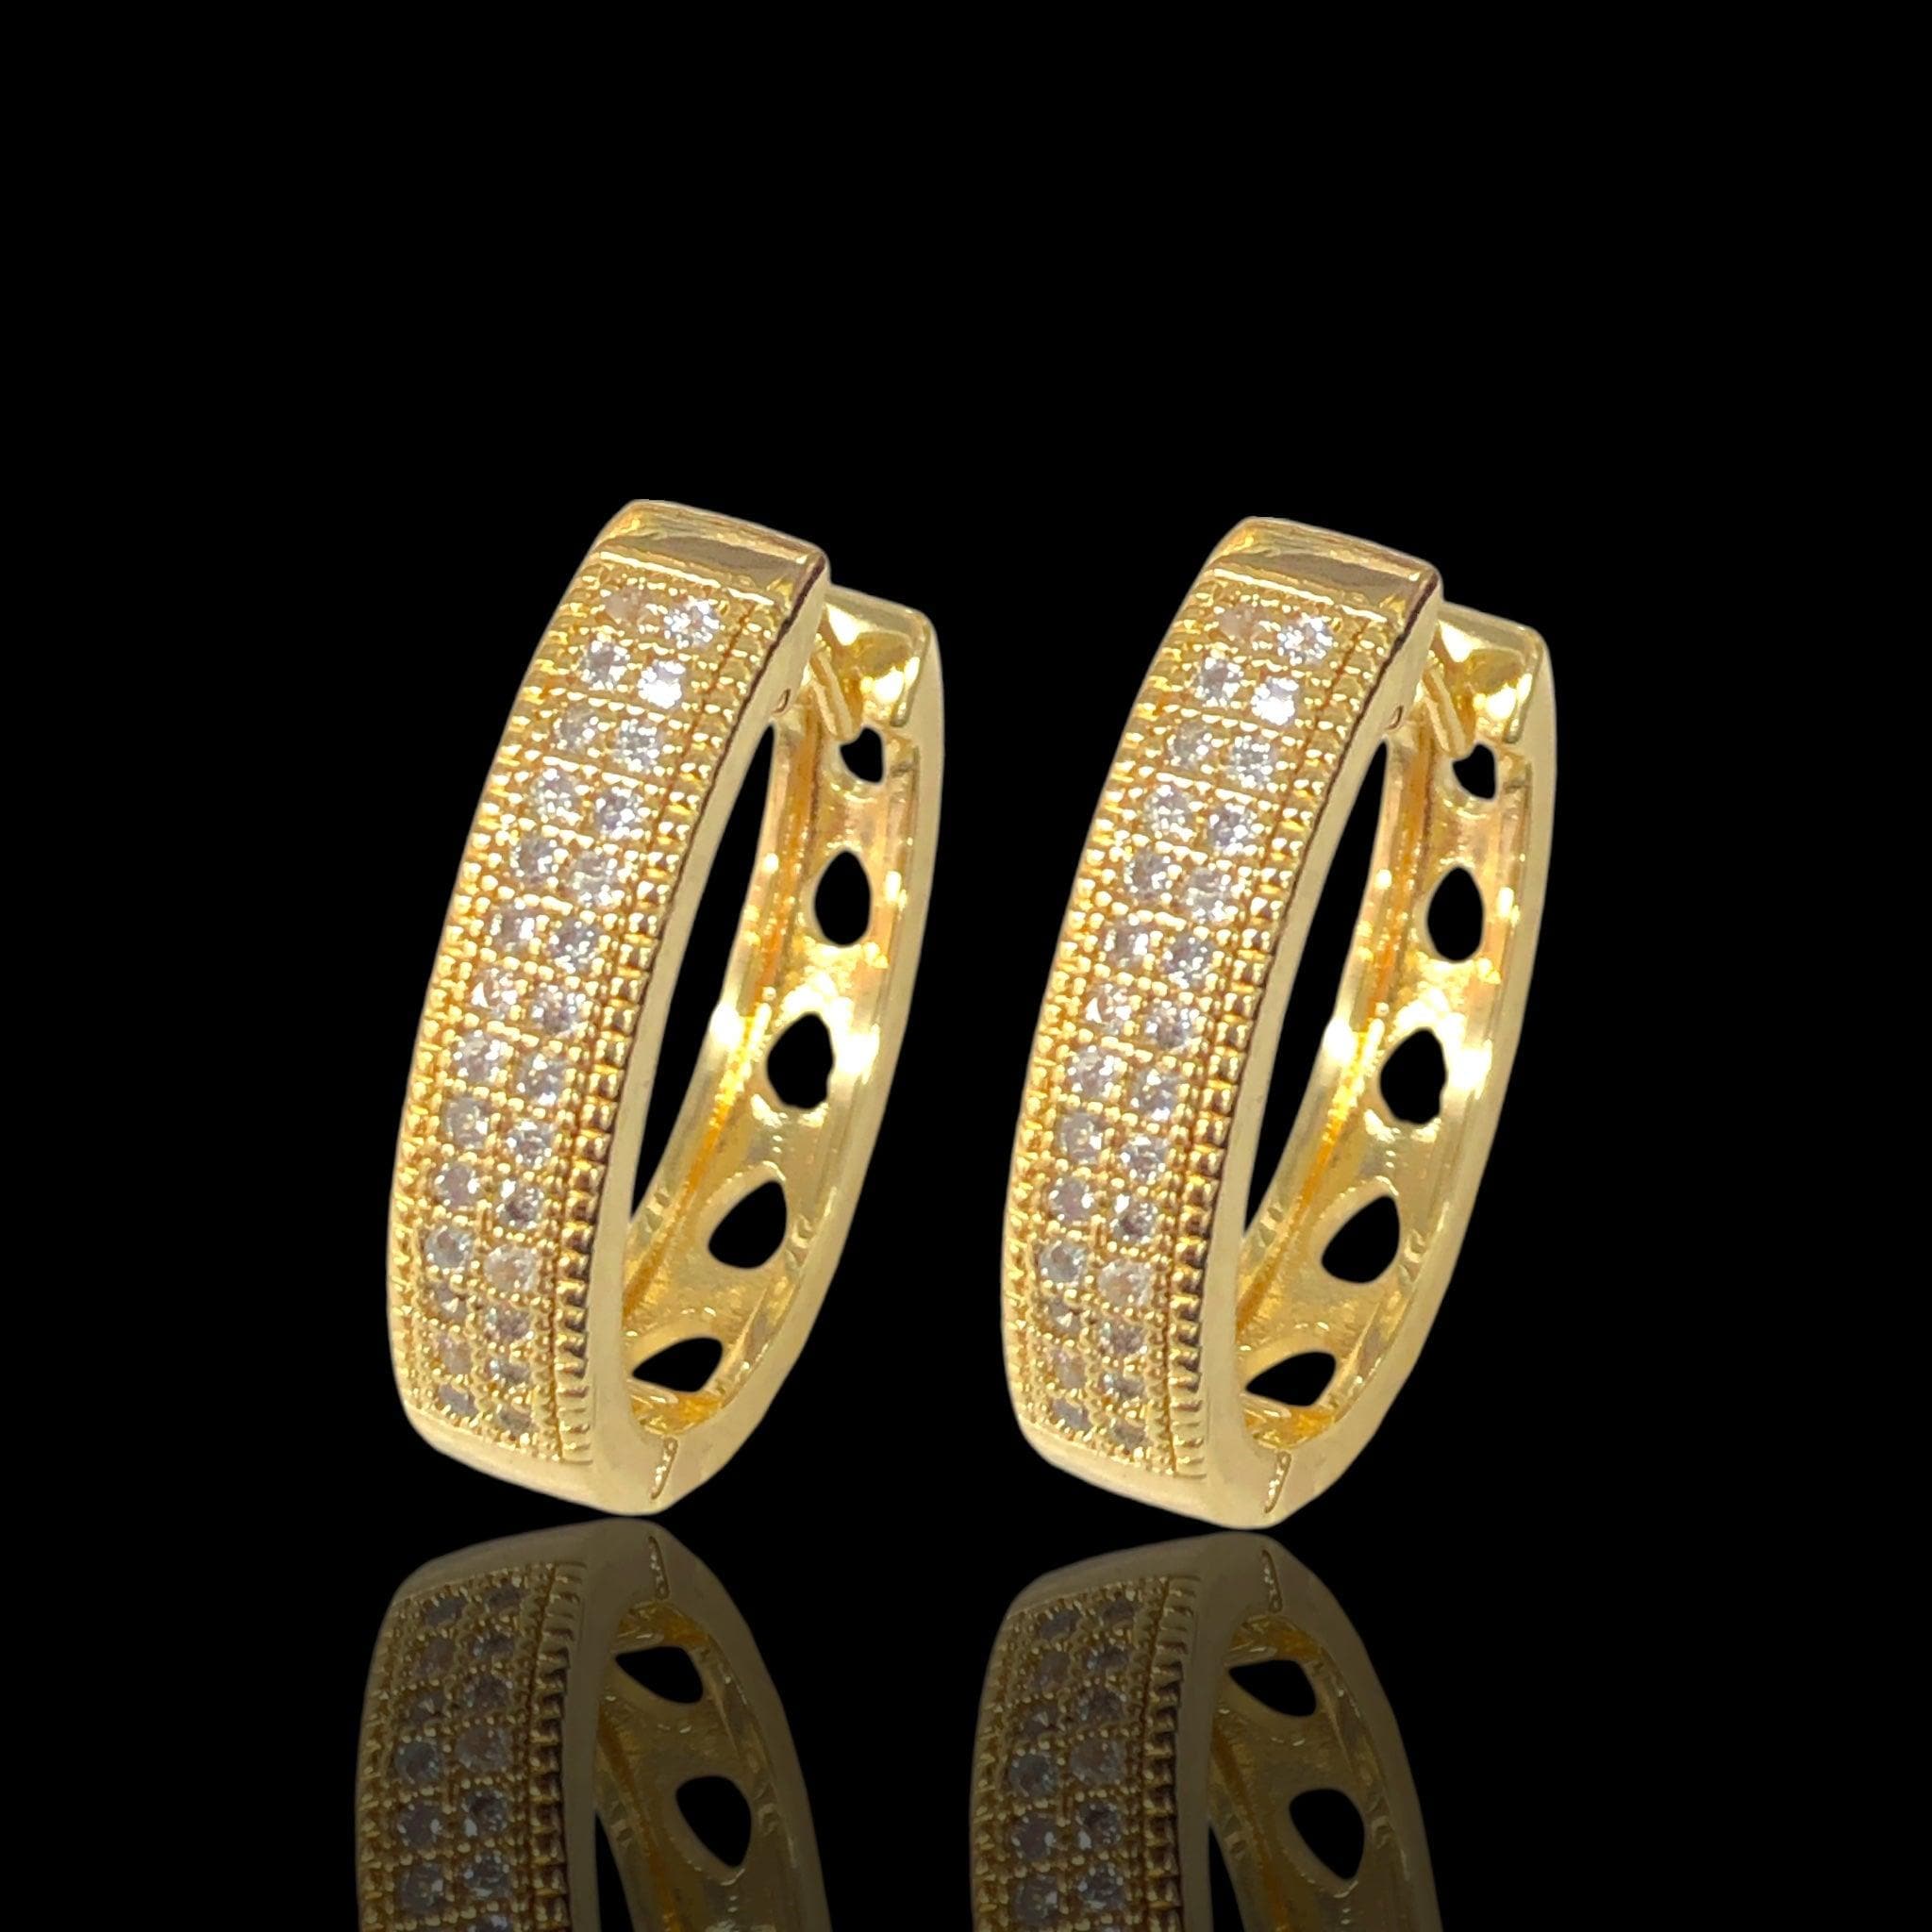 18K Gold Filled Notre Dame CZ Earrings- kuania oro lamindo